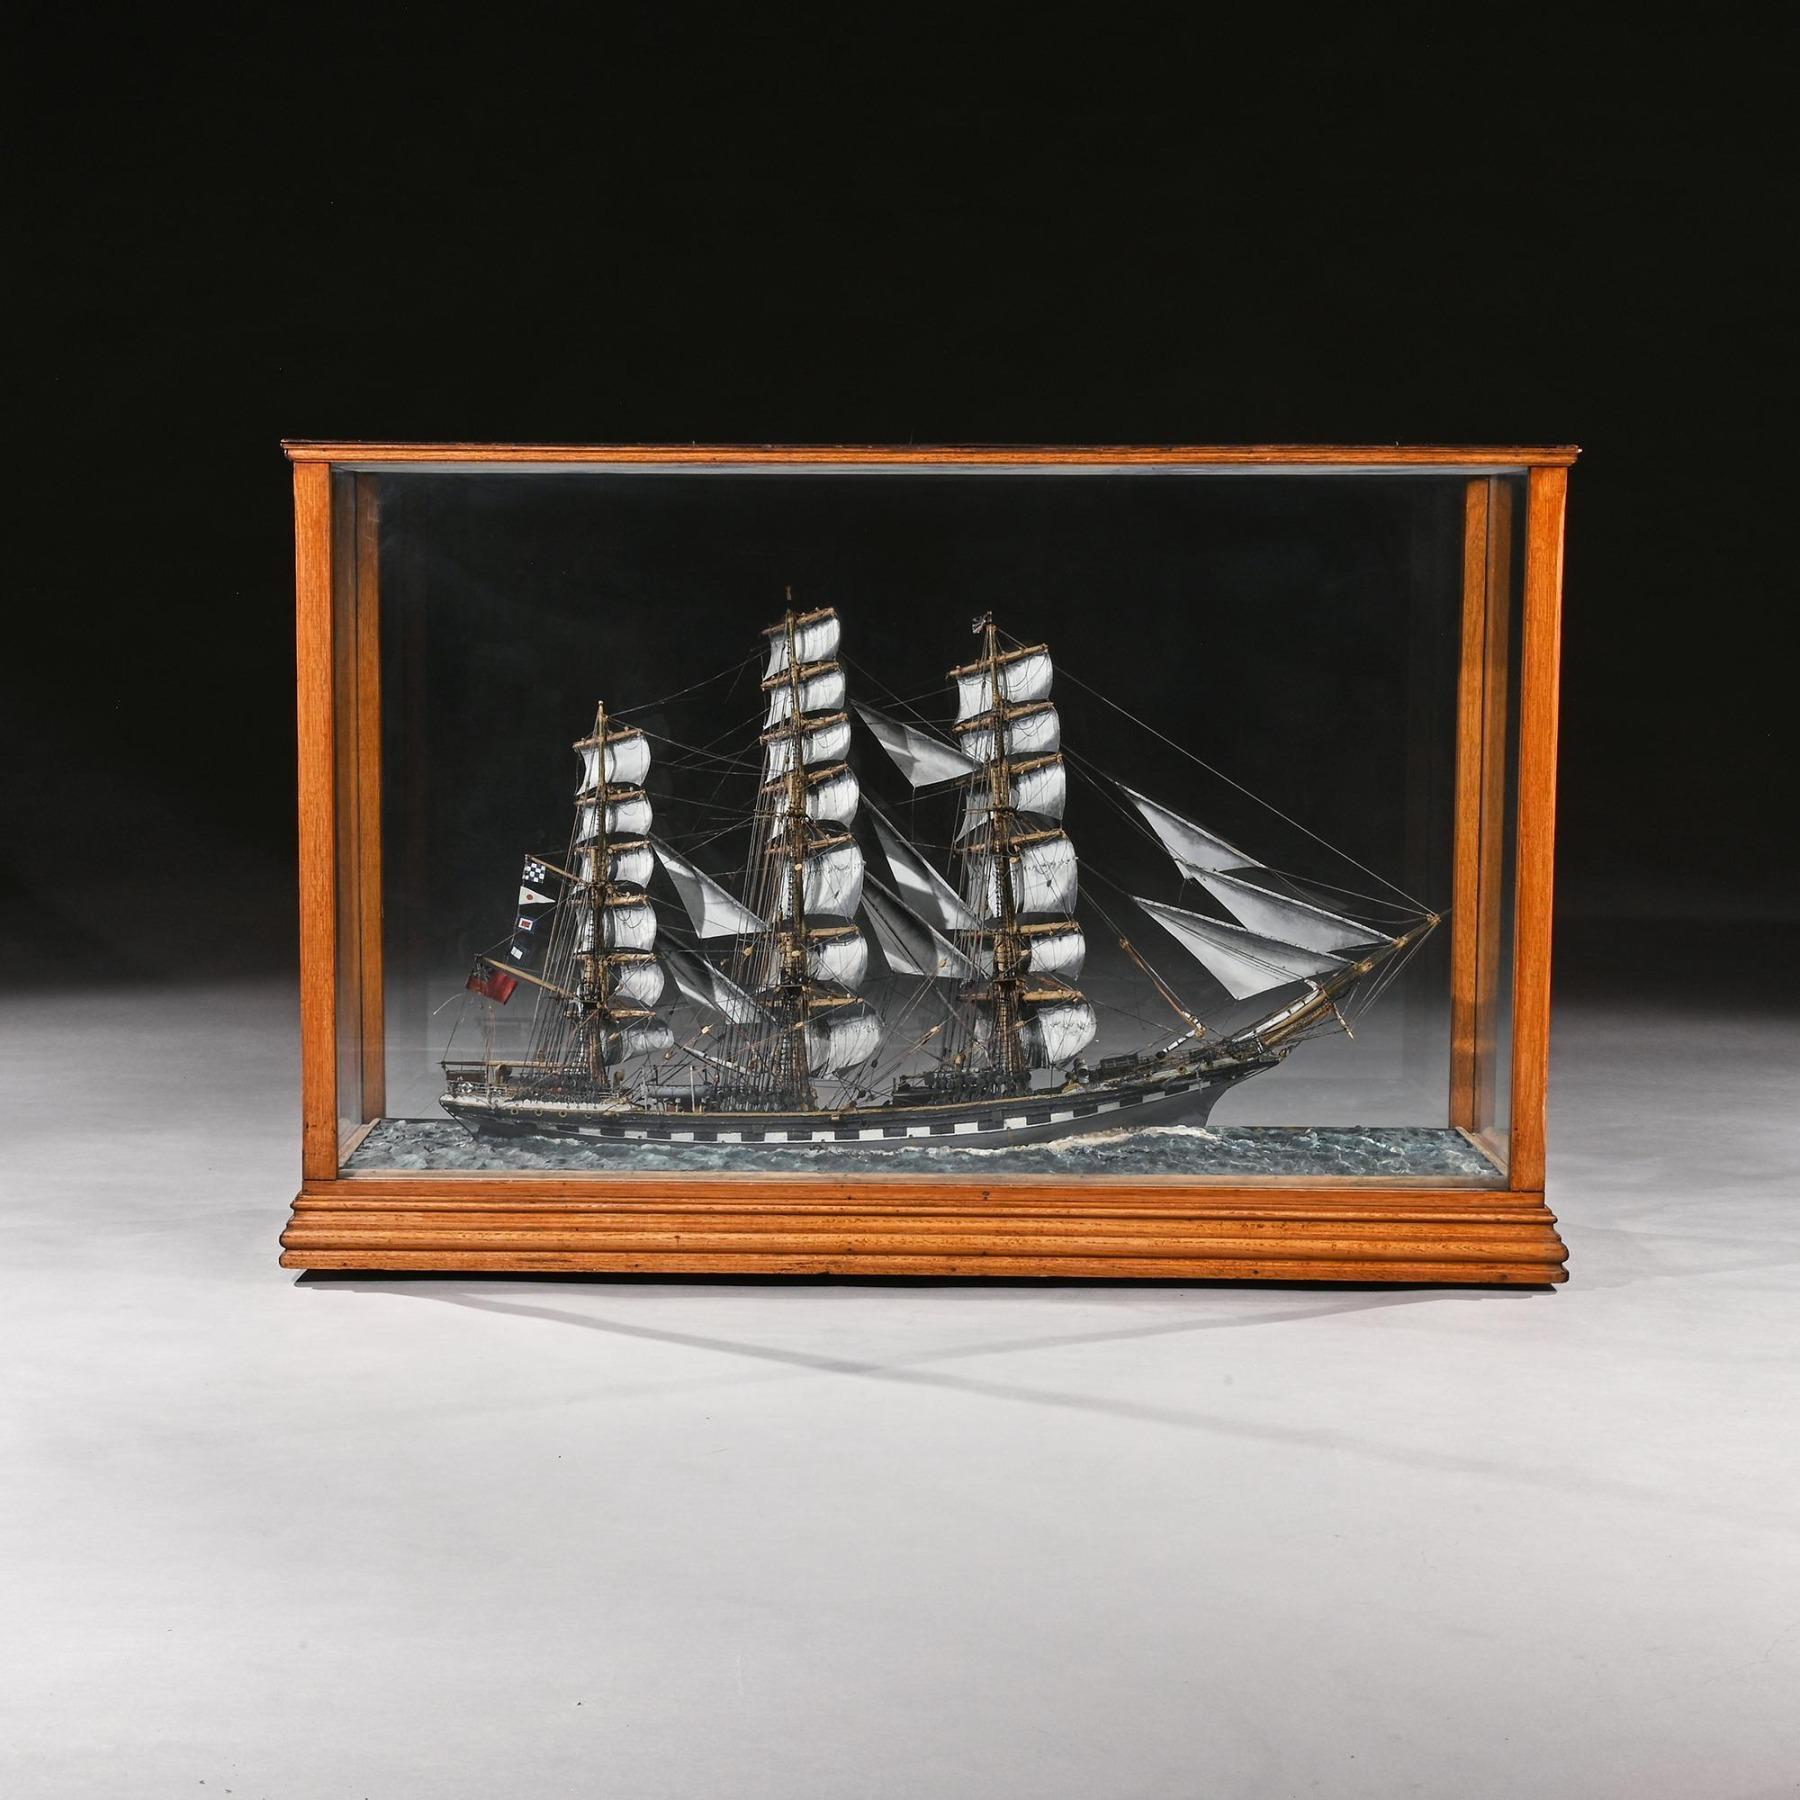 An exceptional 19th century Model of the tea clipper ‘Glengarry’ in full sail, built by Royden & Sons Liverpool in an oak and glass display case.



English Circa 1868.



The Glengarry was a famous Tea Clipper ship that traveled all over